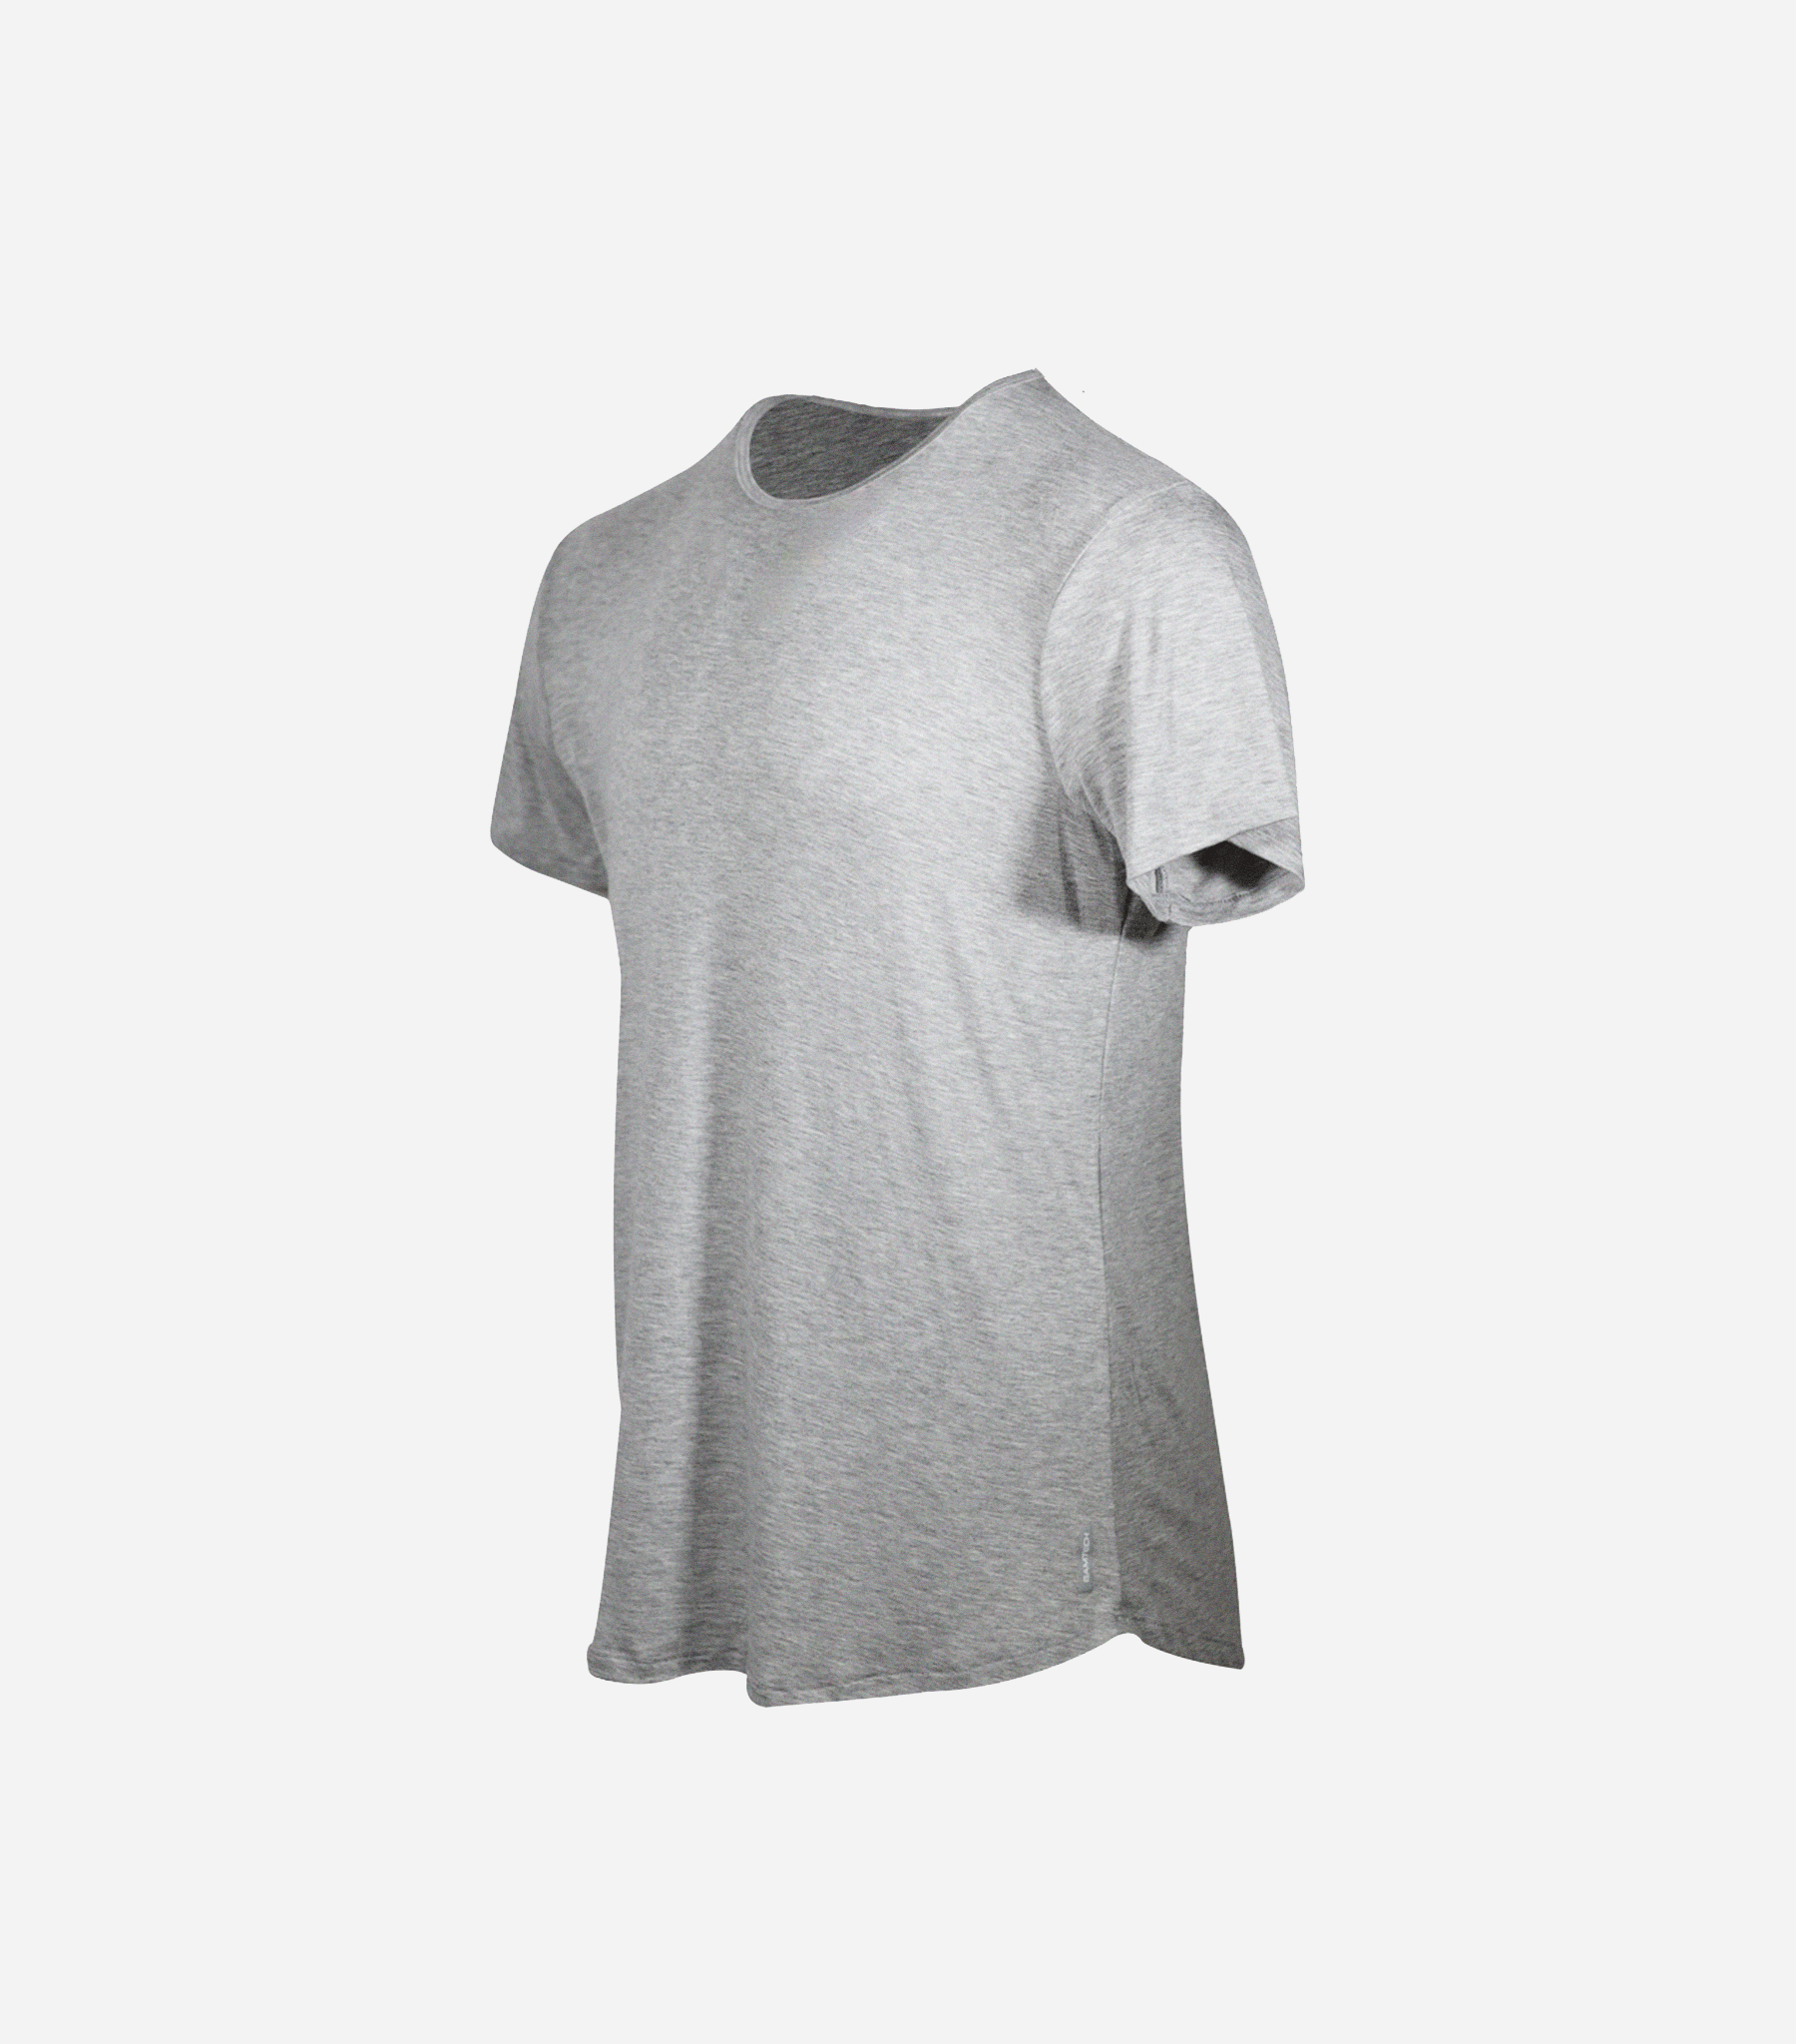 Experience Unmatched Comfort and Style with the Bamboo Swift Curve-Hem T-Shirt. This premium bamboo t-shirt is designed to provide exceptional softness, breathability, and versatility. The curve-hem design adds a modern twist to this classic wardrobe stap